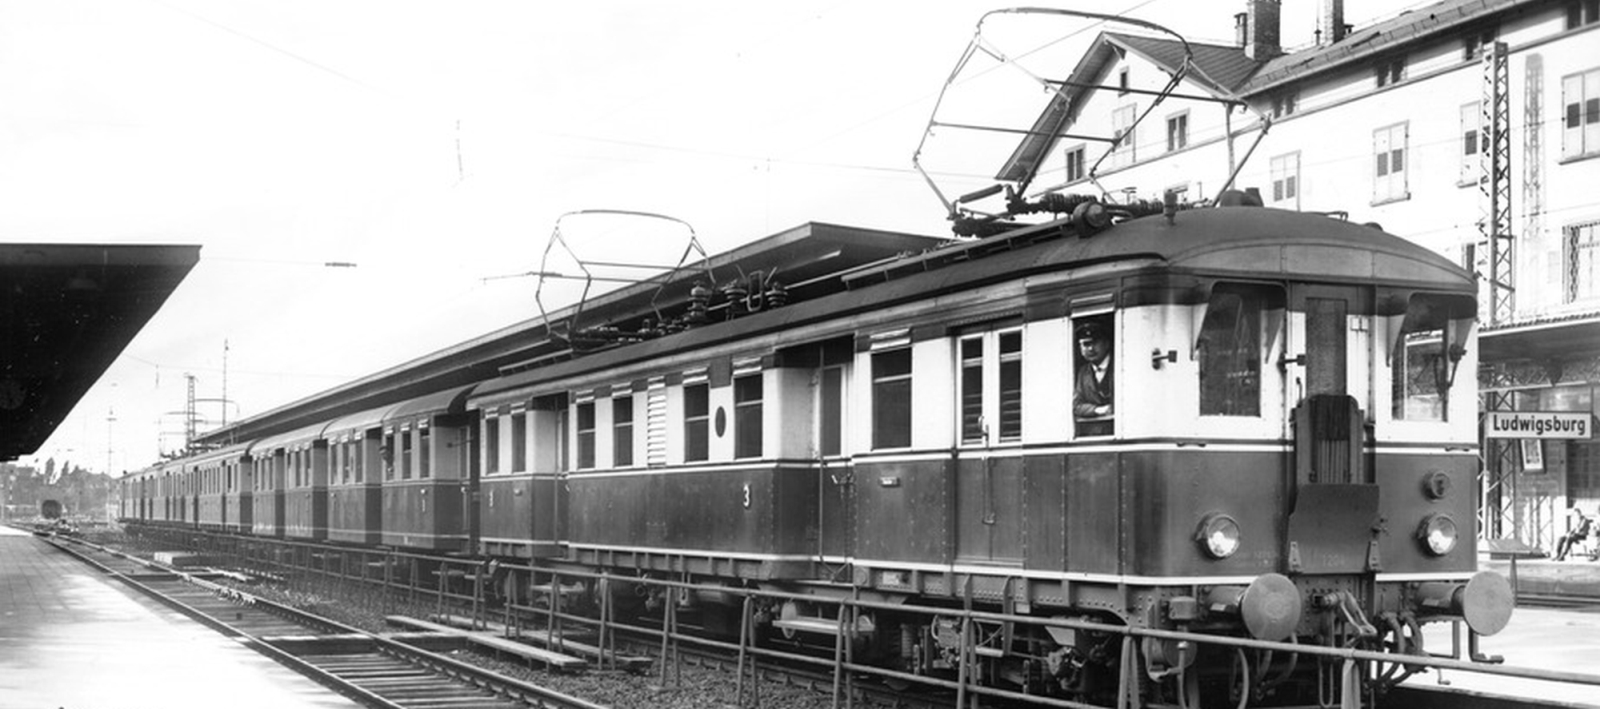 Two trains coupled together in Ludwigsburg